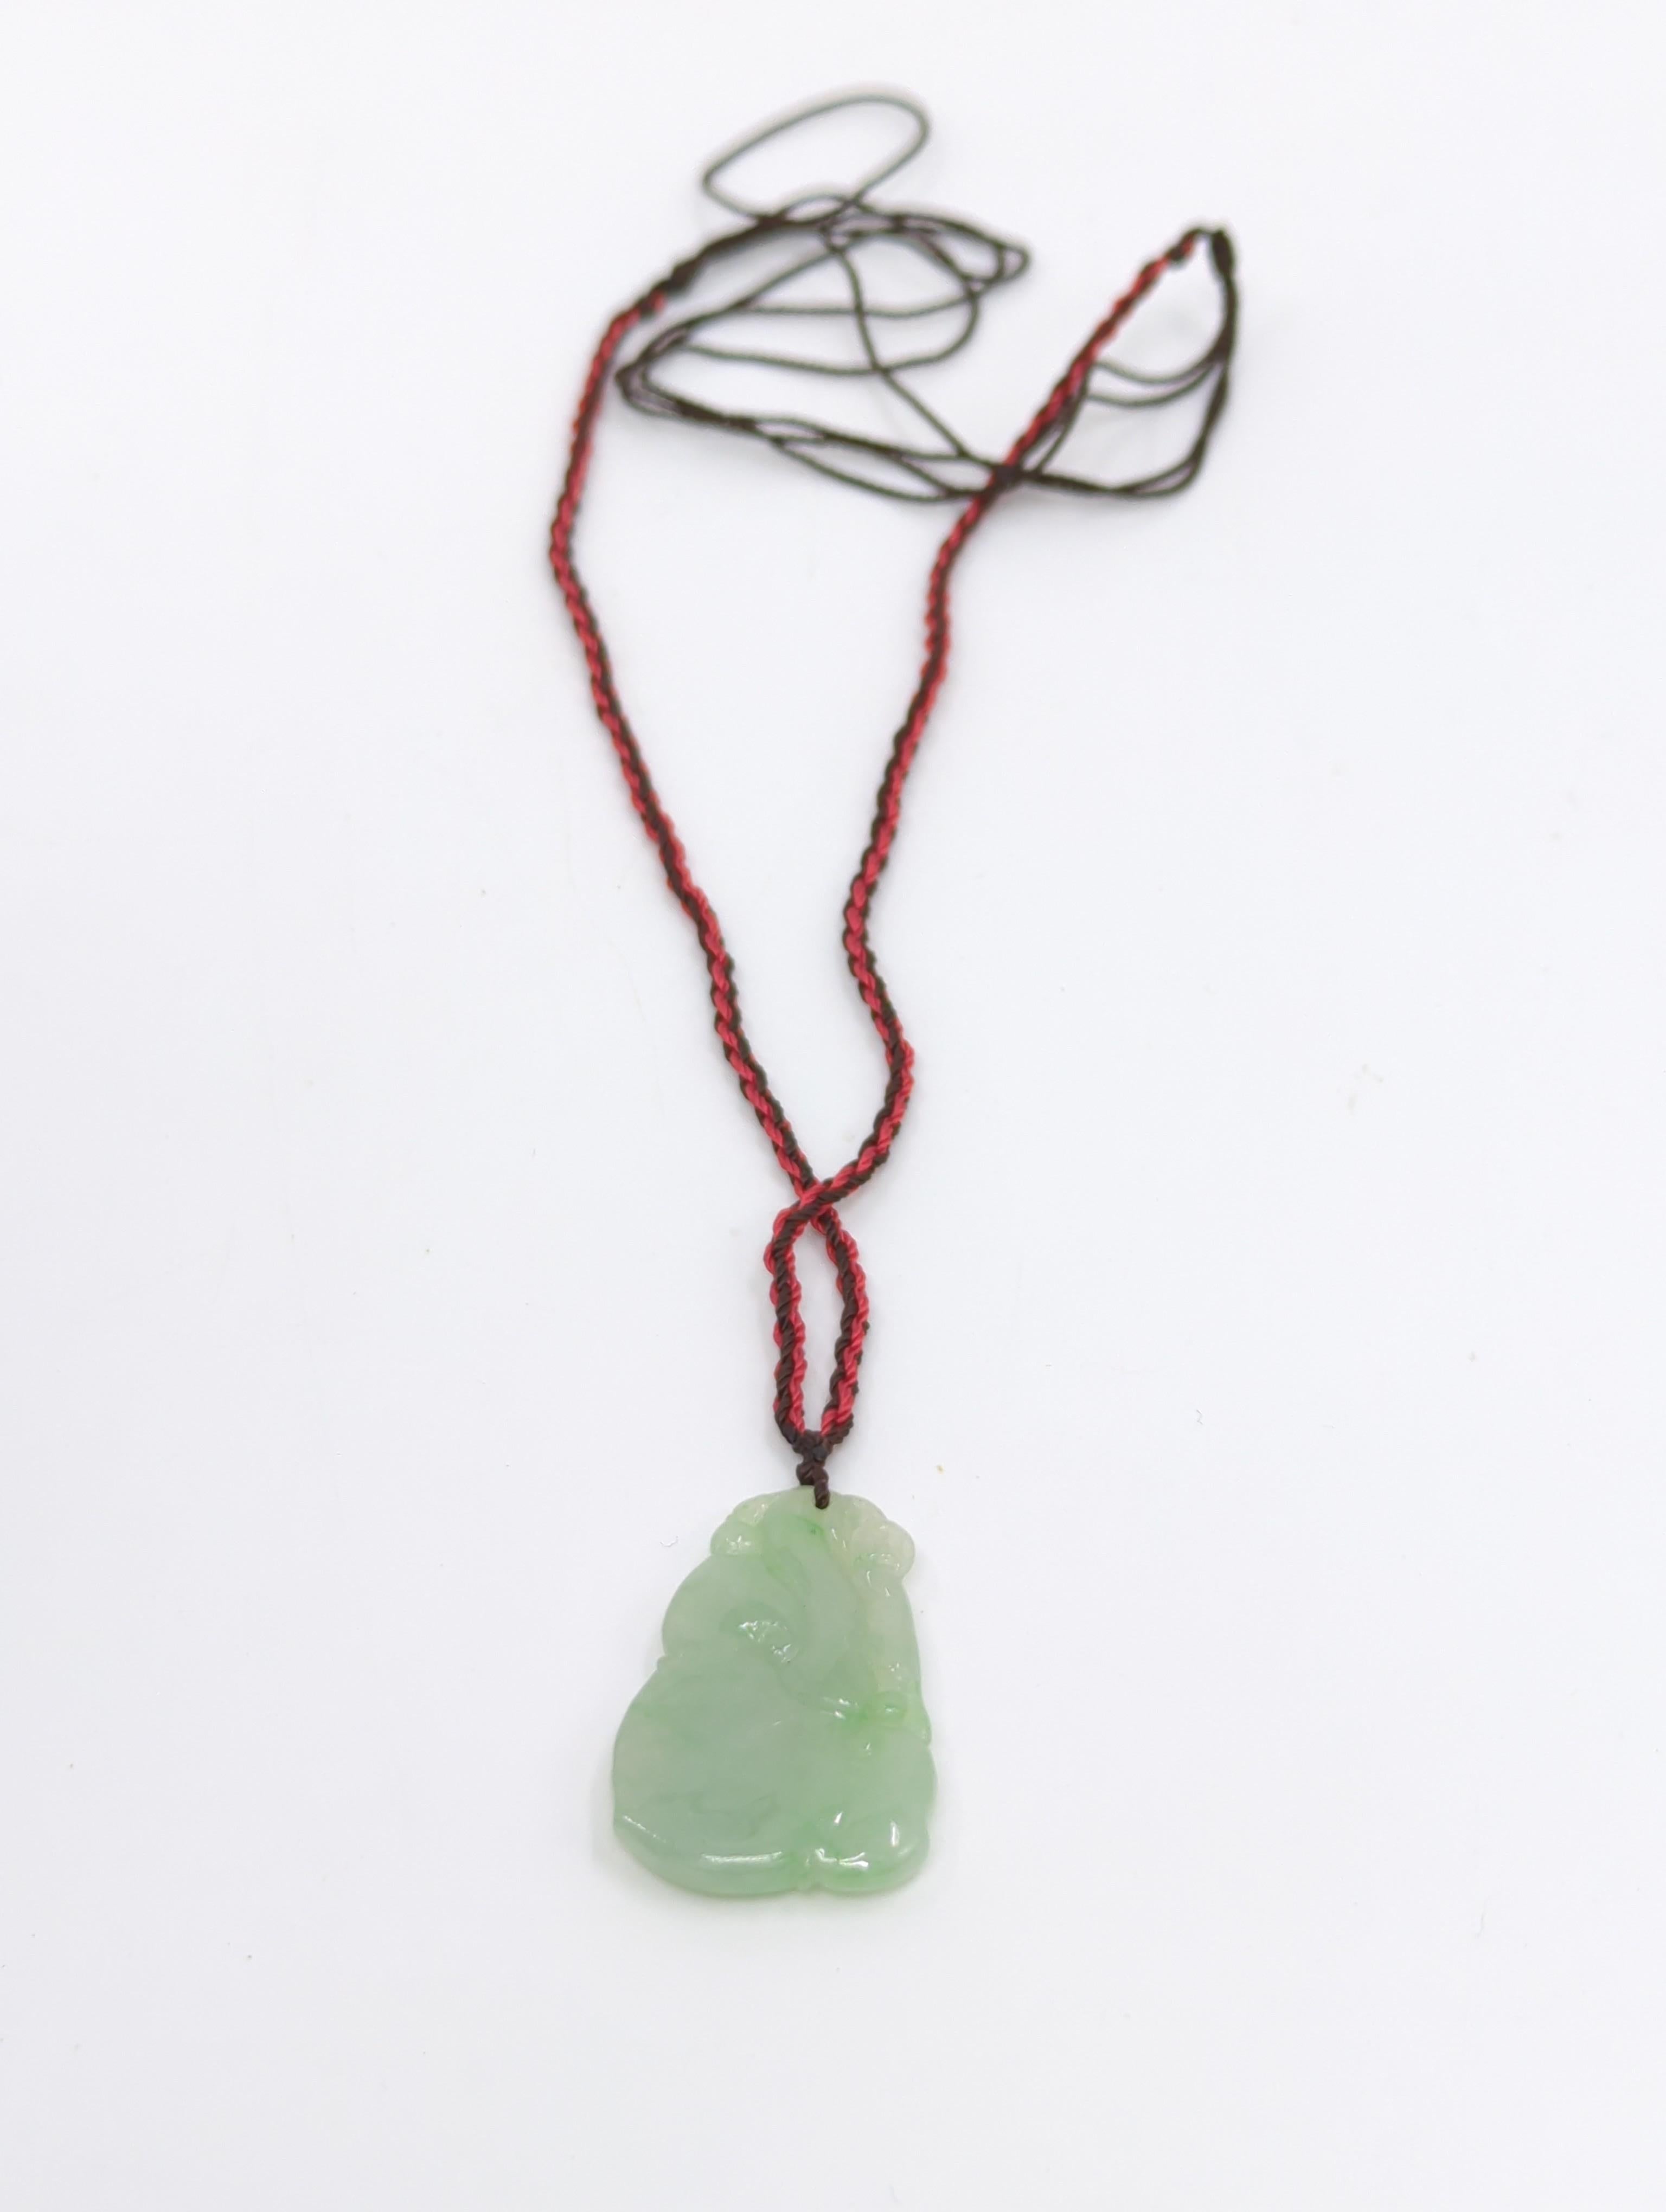 Women's or Men's Chinese Carved Light Green Ruyi Jadeite Pendant Necklace A-Grade 18-24